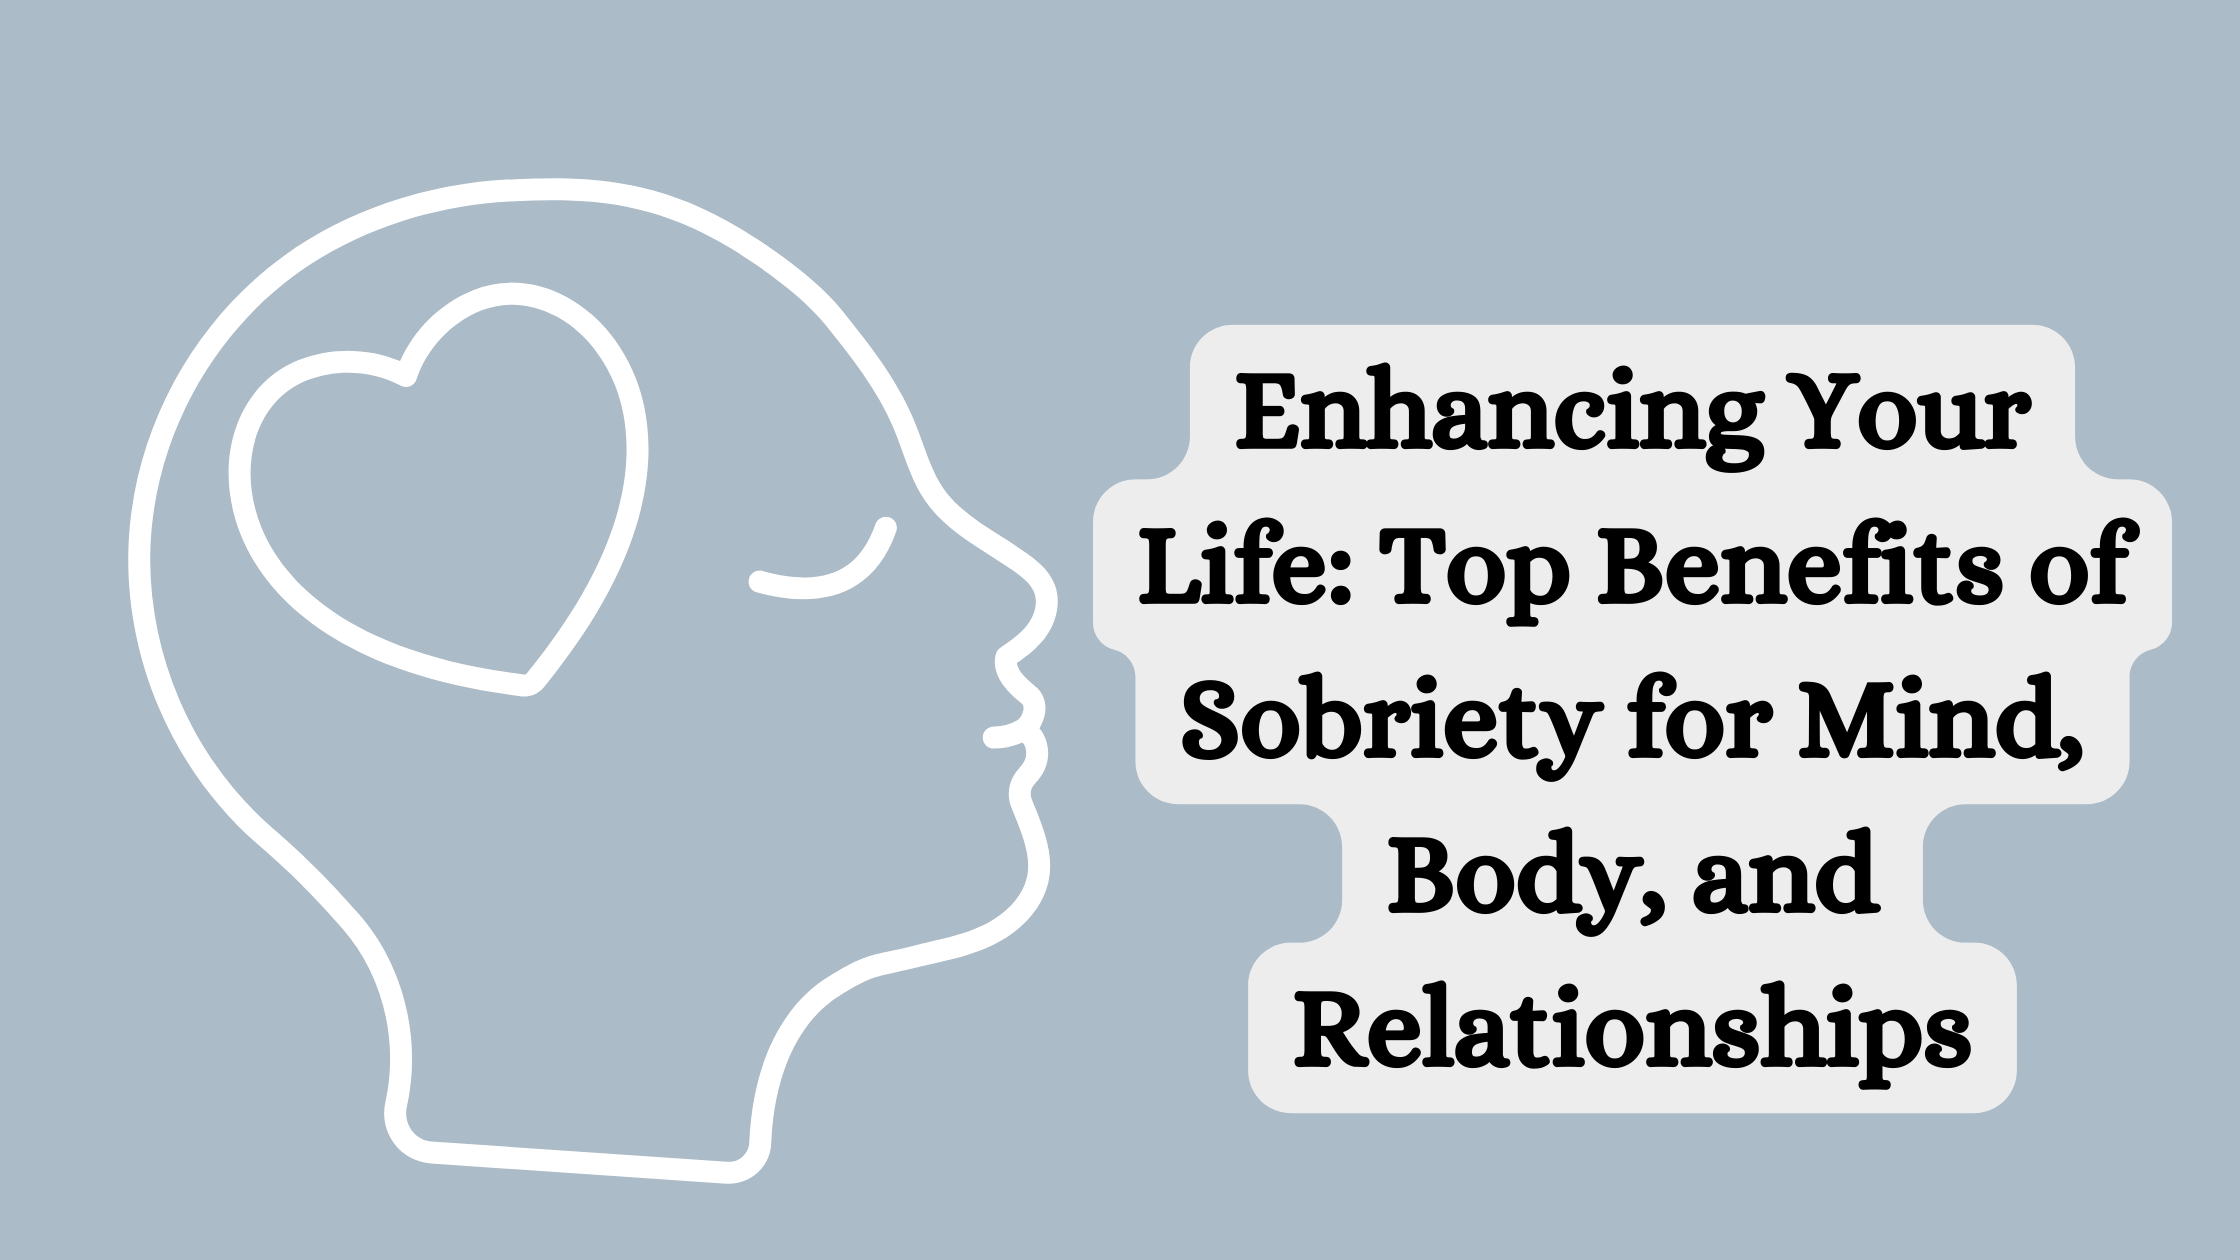 Top Benefits of Sobriety for Mind, Body, and Relationships